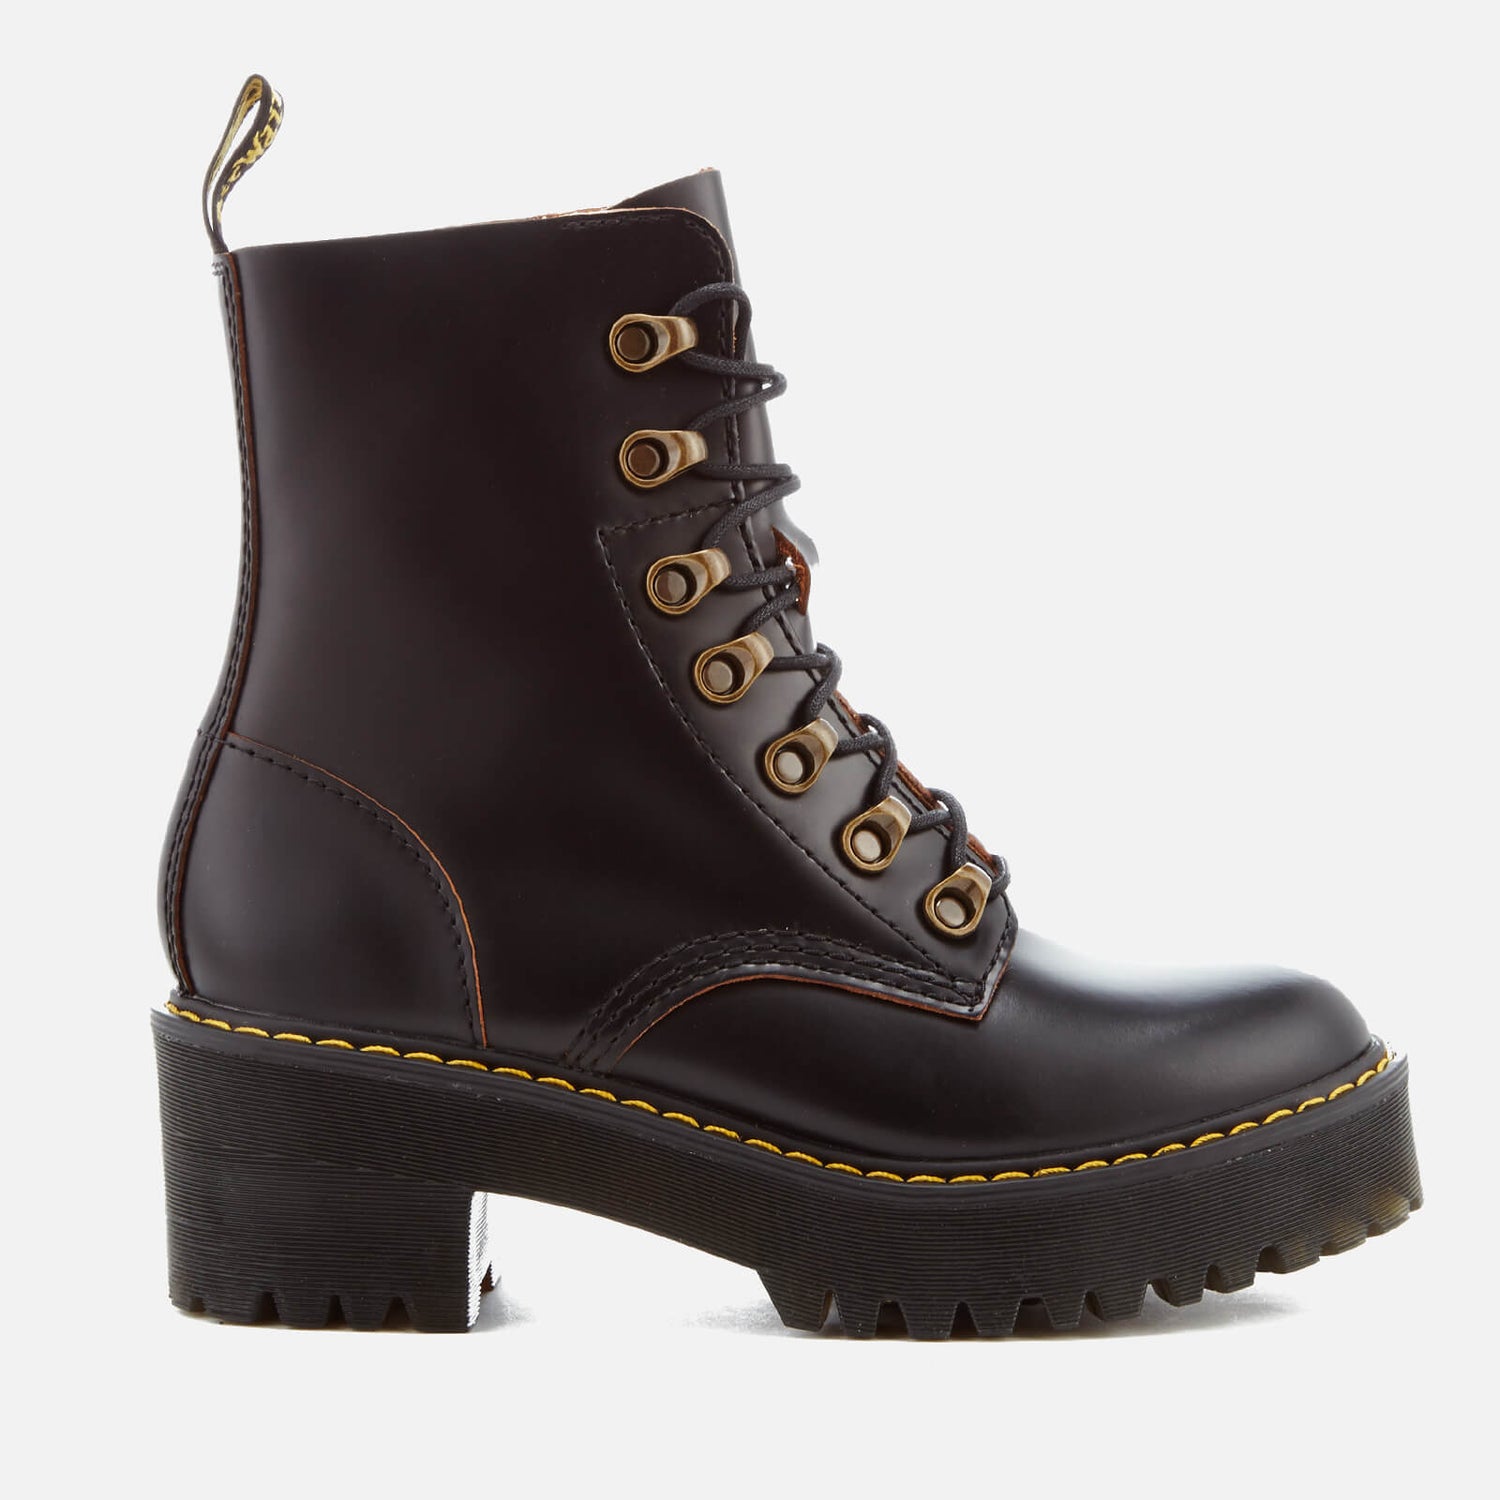 Dr. Martens Women's Leona Leather Lace Up Heeled Boots - Black